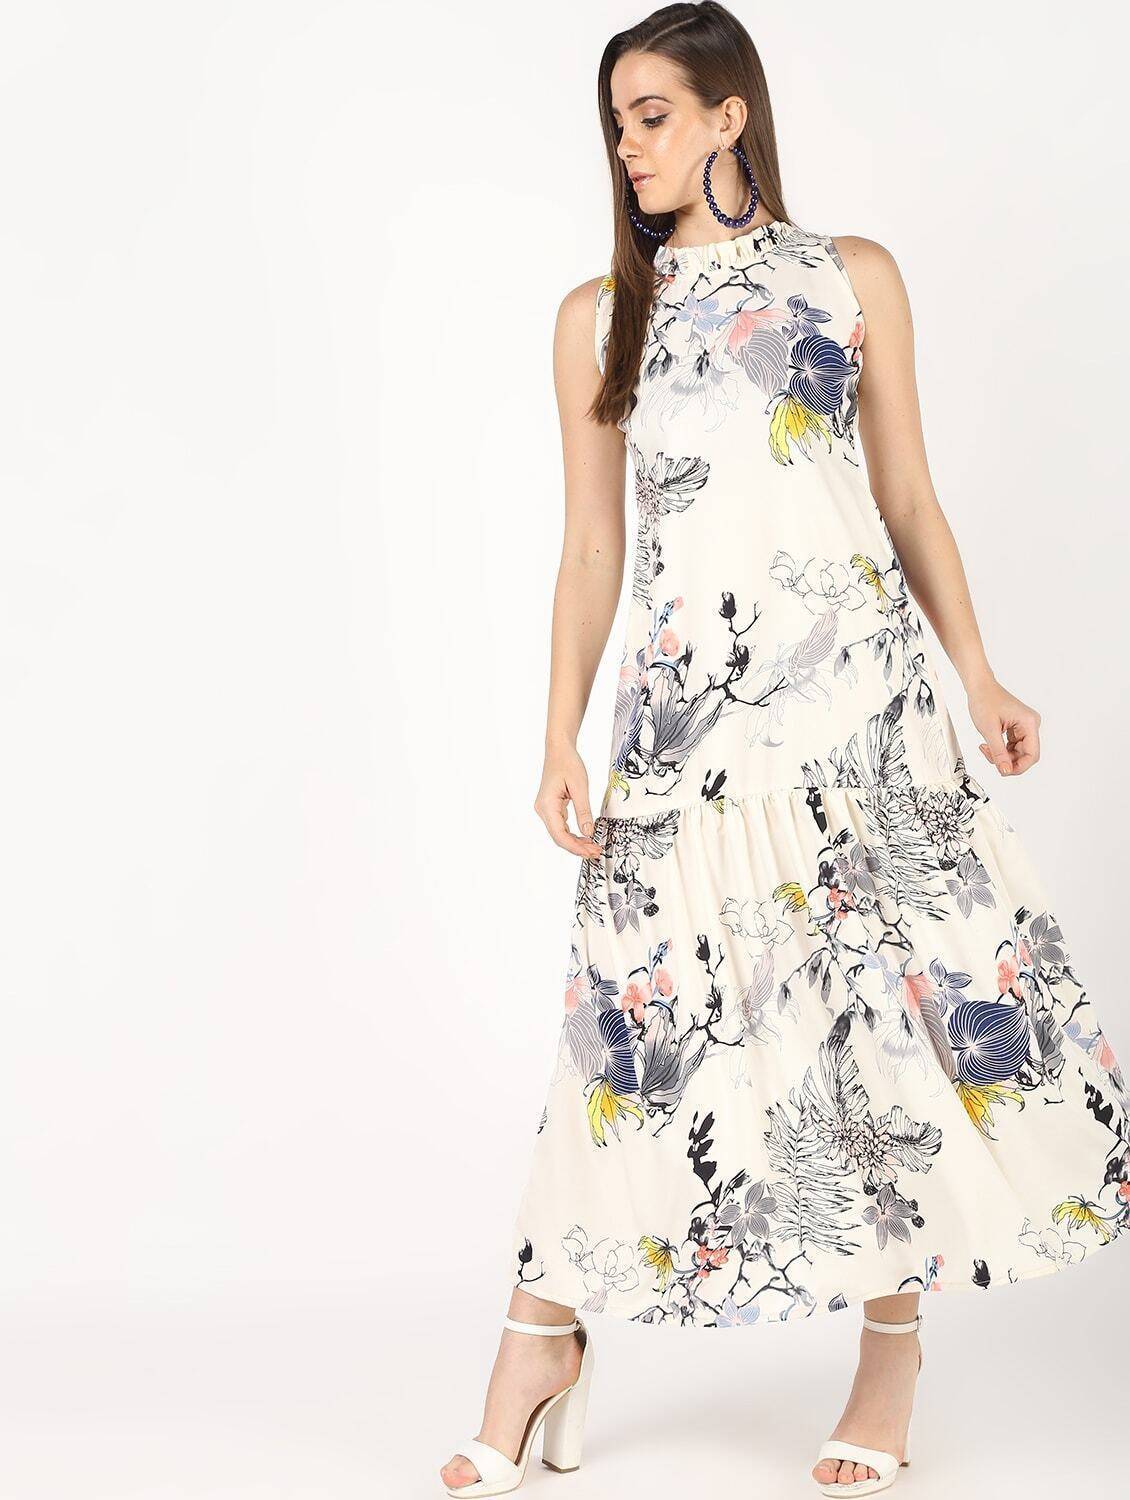 Women's Off White Floral Printed Long A-Line Party Dress - Cheera